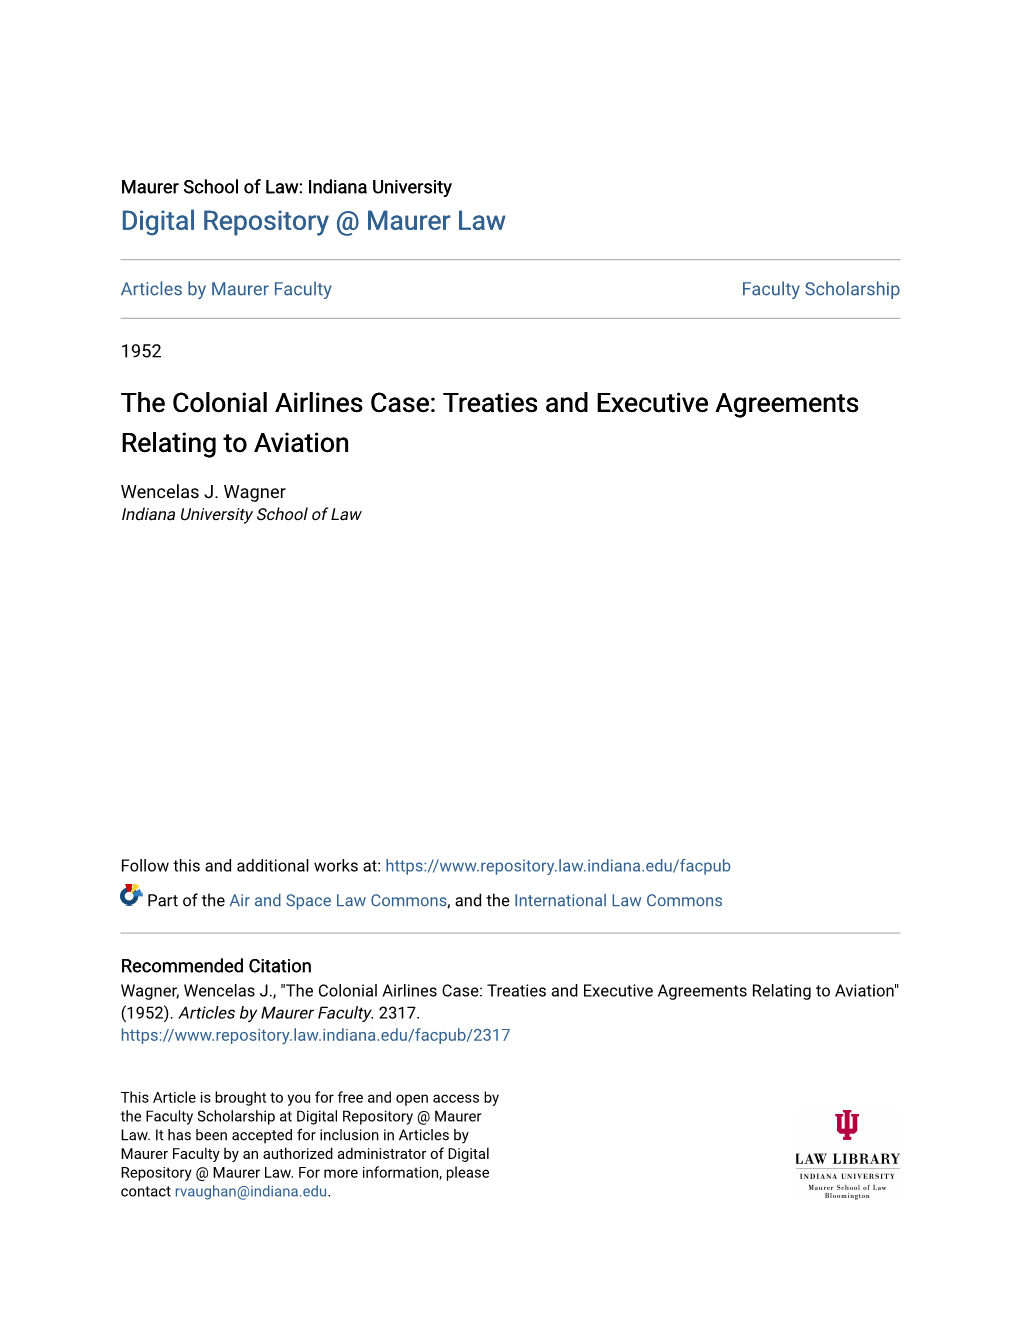 The Colonial Airlines Case: Treaties and Executive Agreements Relating to Aviation